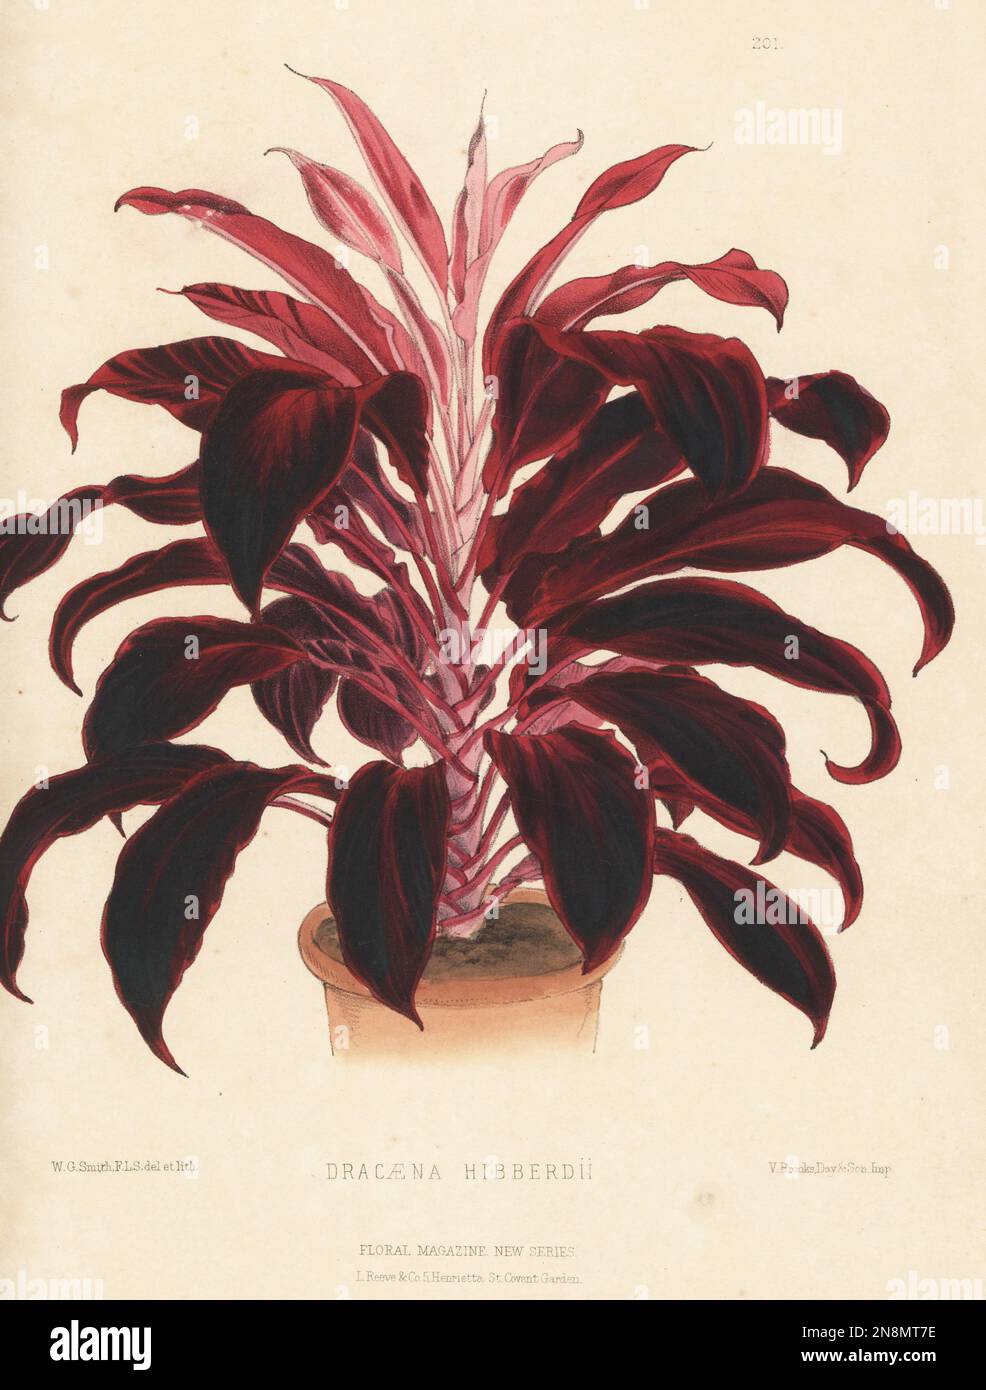 Hybrid dragon tree, Dracaena × hibberdii. As Dracaena hibberdii. Named for Shirley Hibberd, editor of Gardener's Magazine, and raised by Bernard Samuel Williams, Victoria and Paradise Nursery, Upper Holloway. Handcolored botanical illustration drawn and lithographed by Worthington George Smith from Henry Honywood Dombrain's Floral Magazine, New Series, Volume 5, L. Reeve, London, 1876. Lithograph printed by Vincent Brooks, Day & Son. Stock Photo